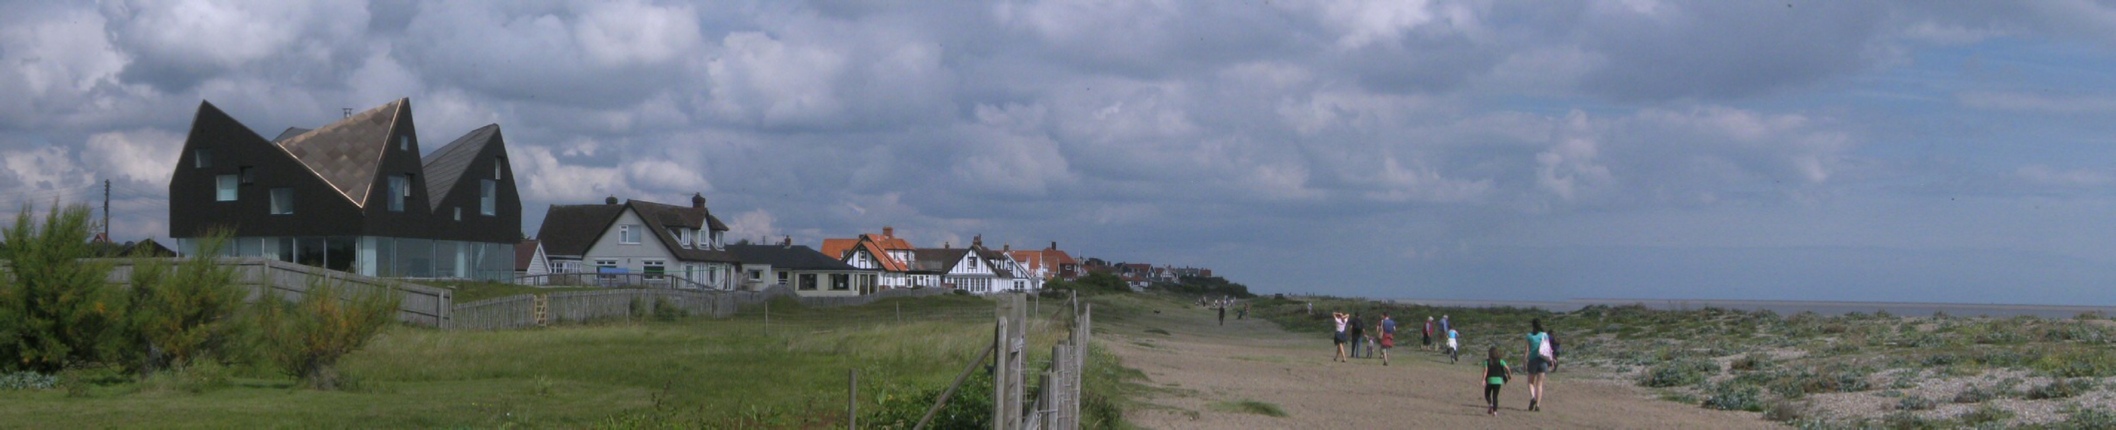 The Dune House, Thorpeness